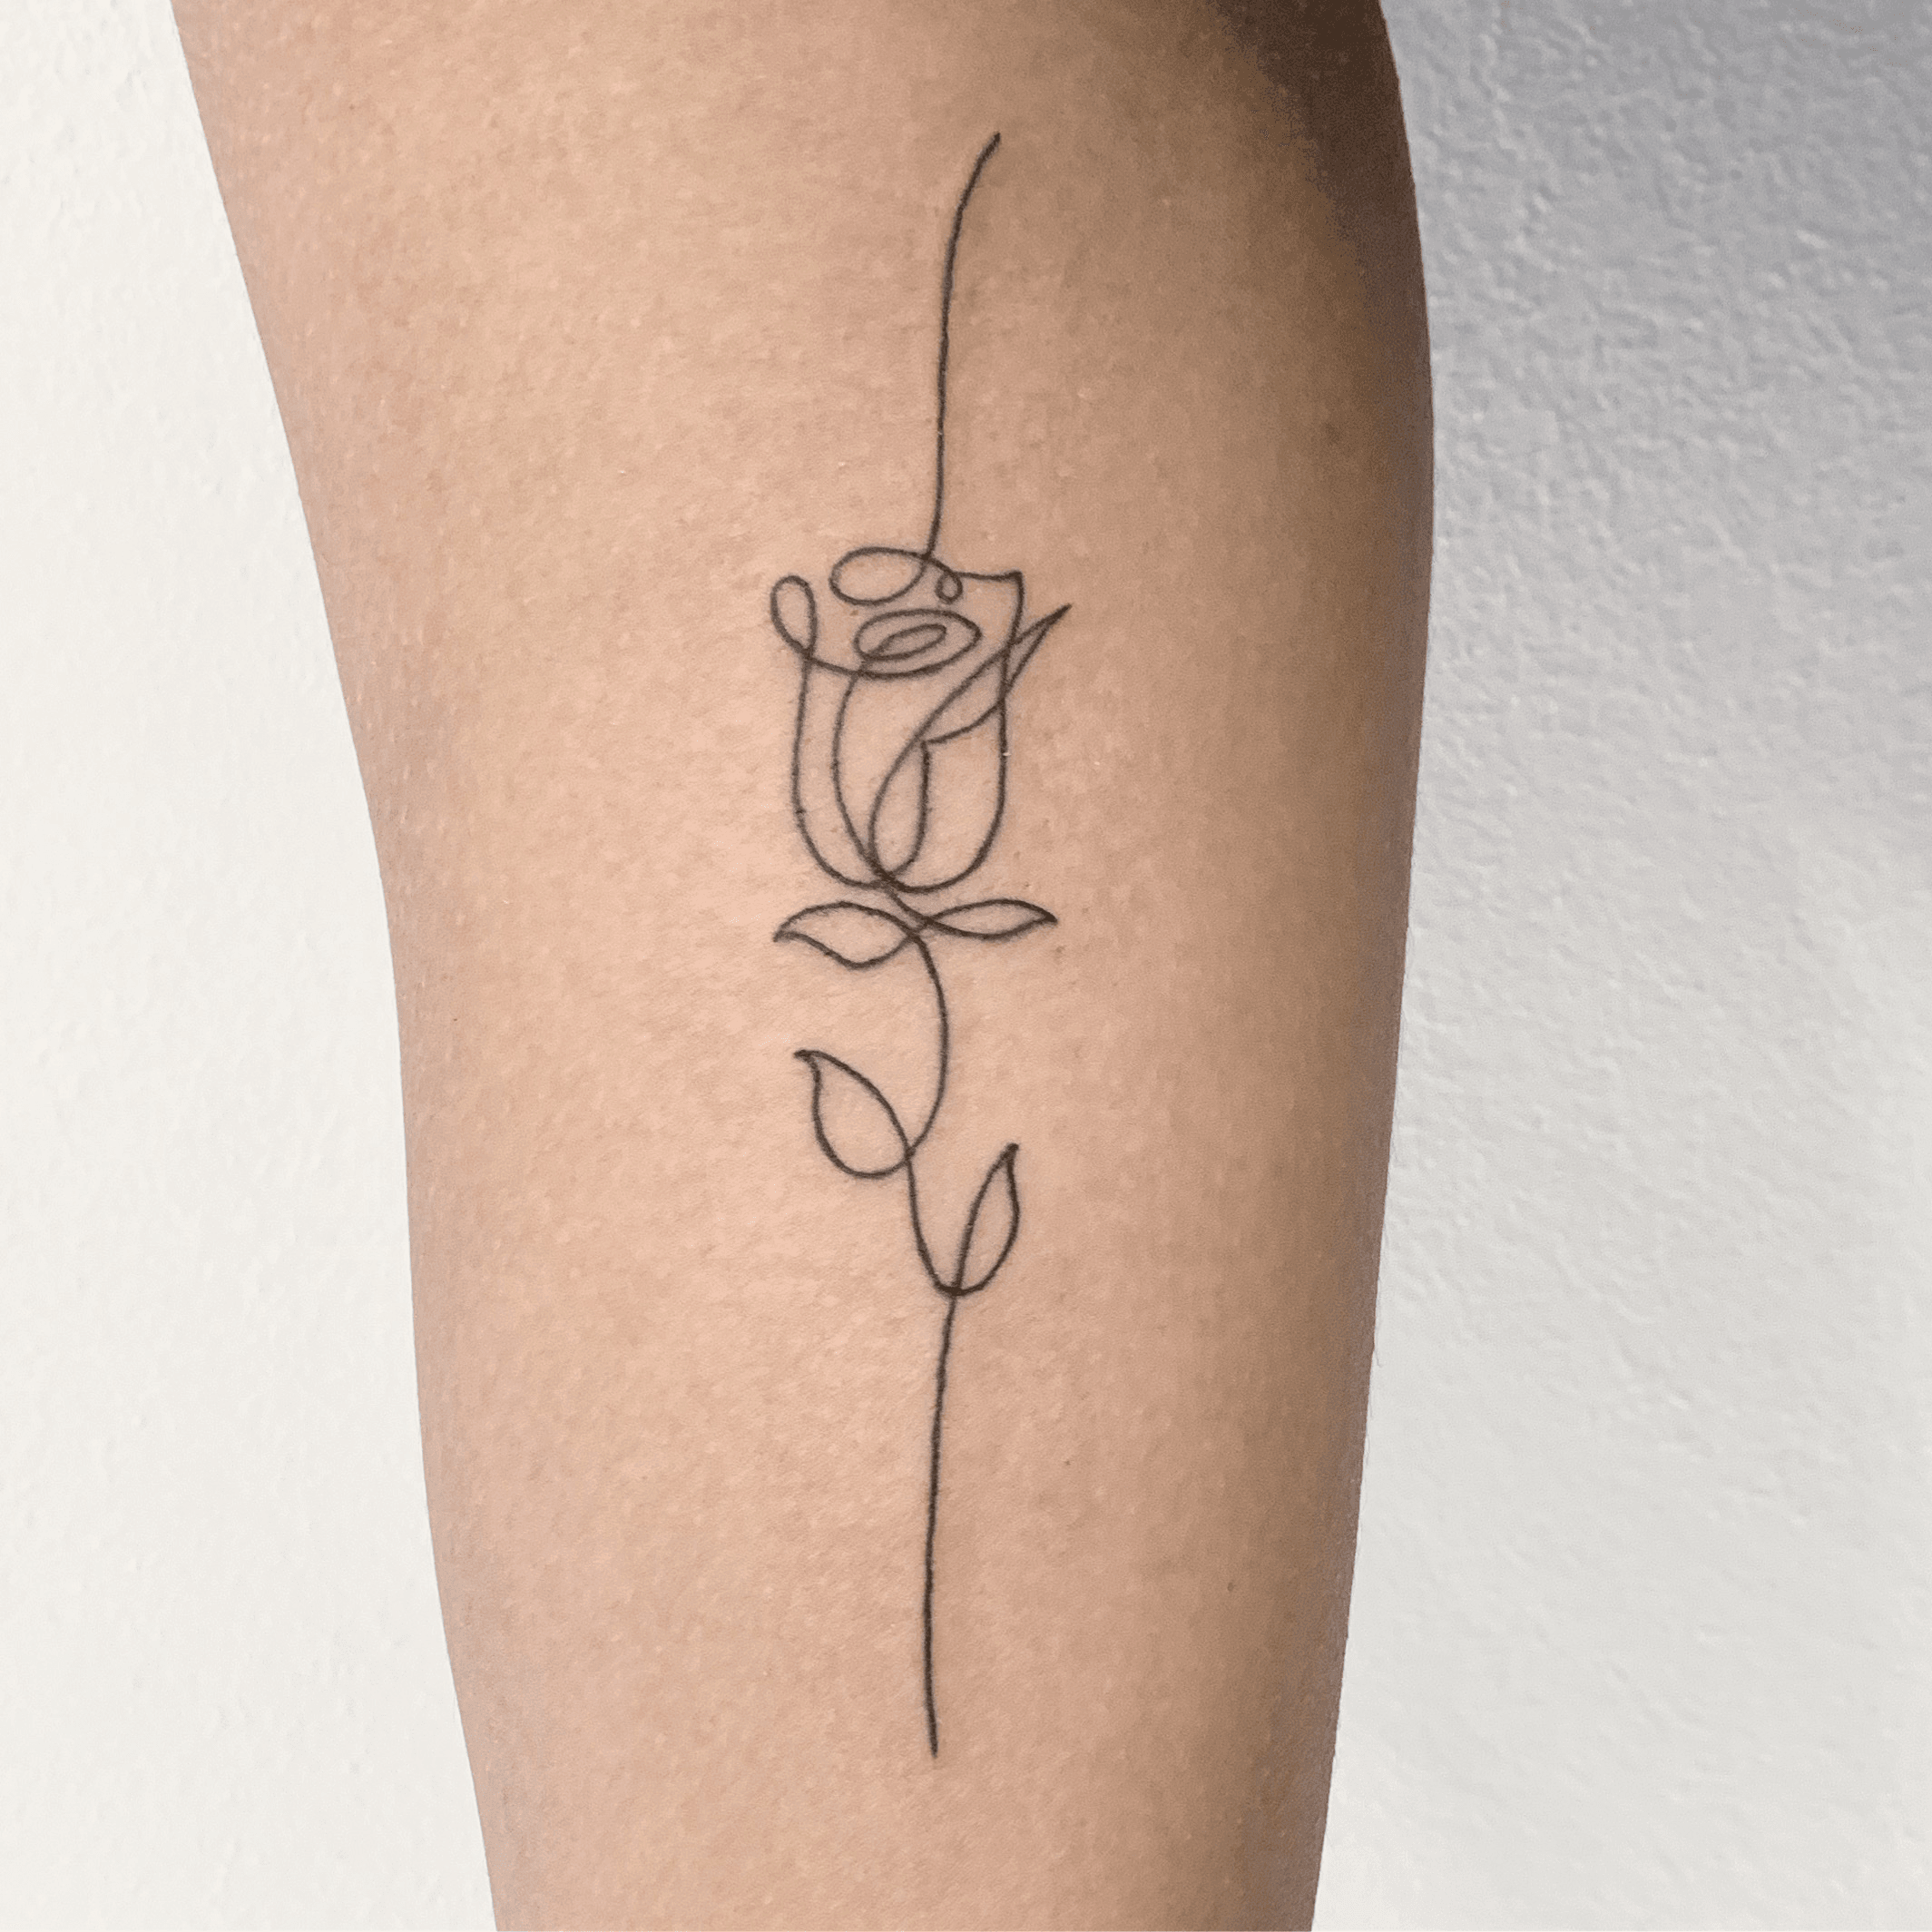 532 Small Rose Tattoo Images Stock Photos  Vectors  Shutterstock